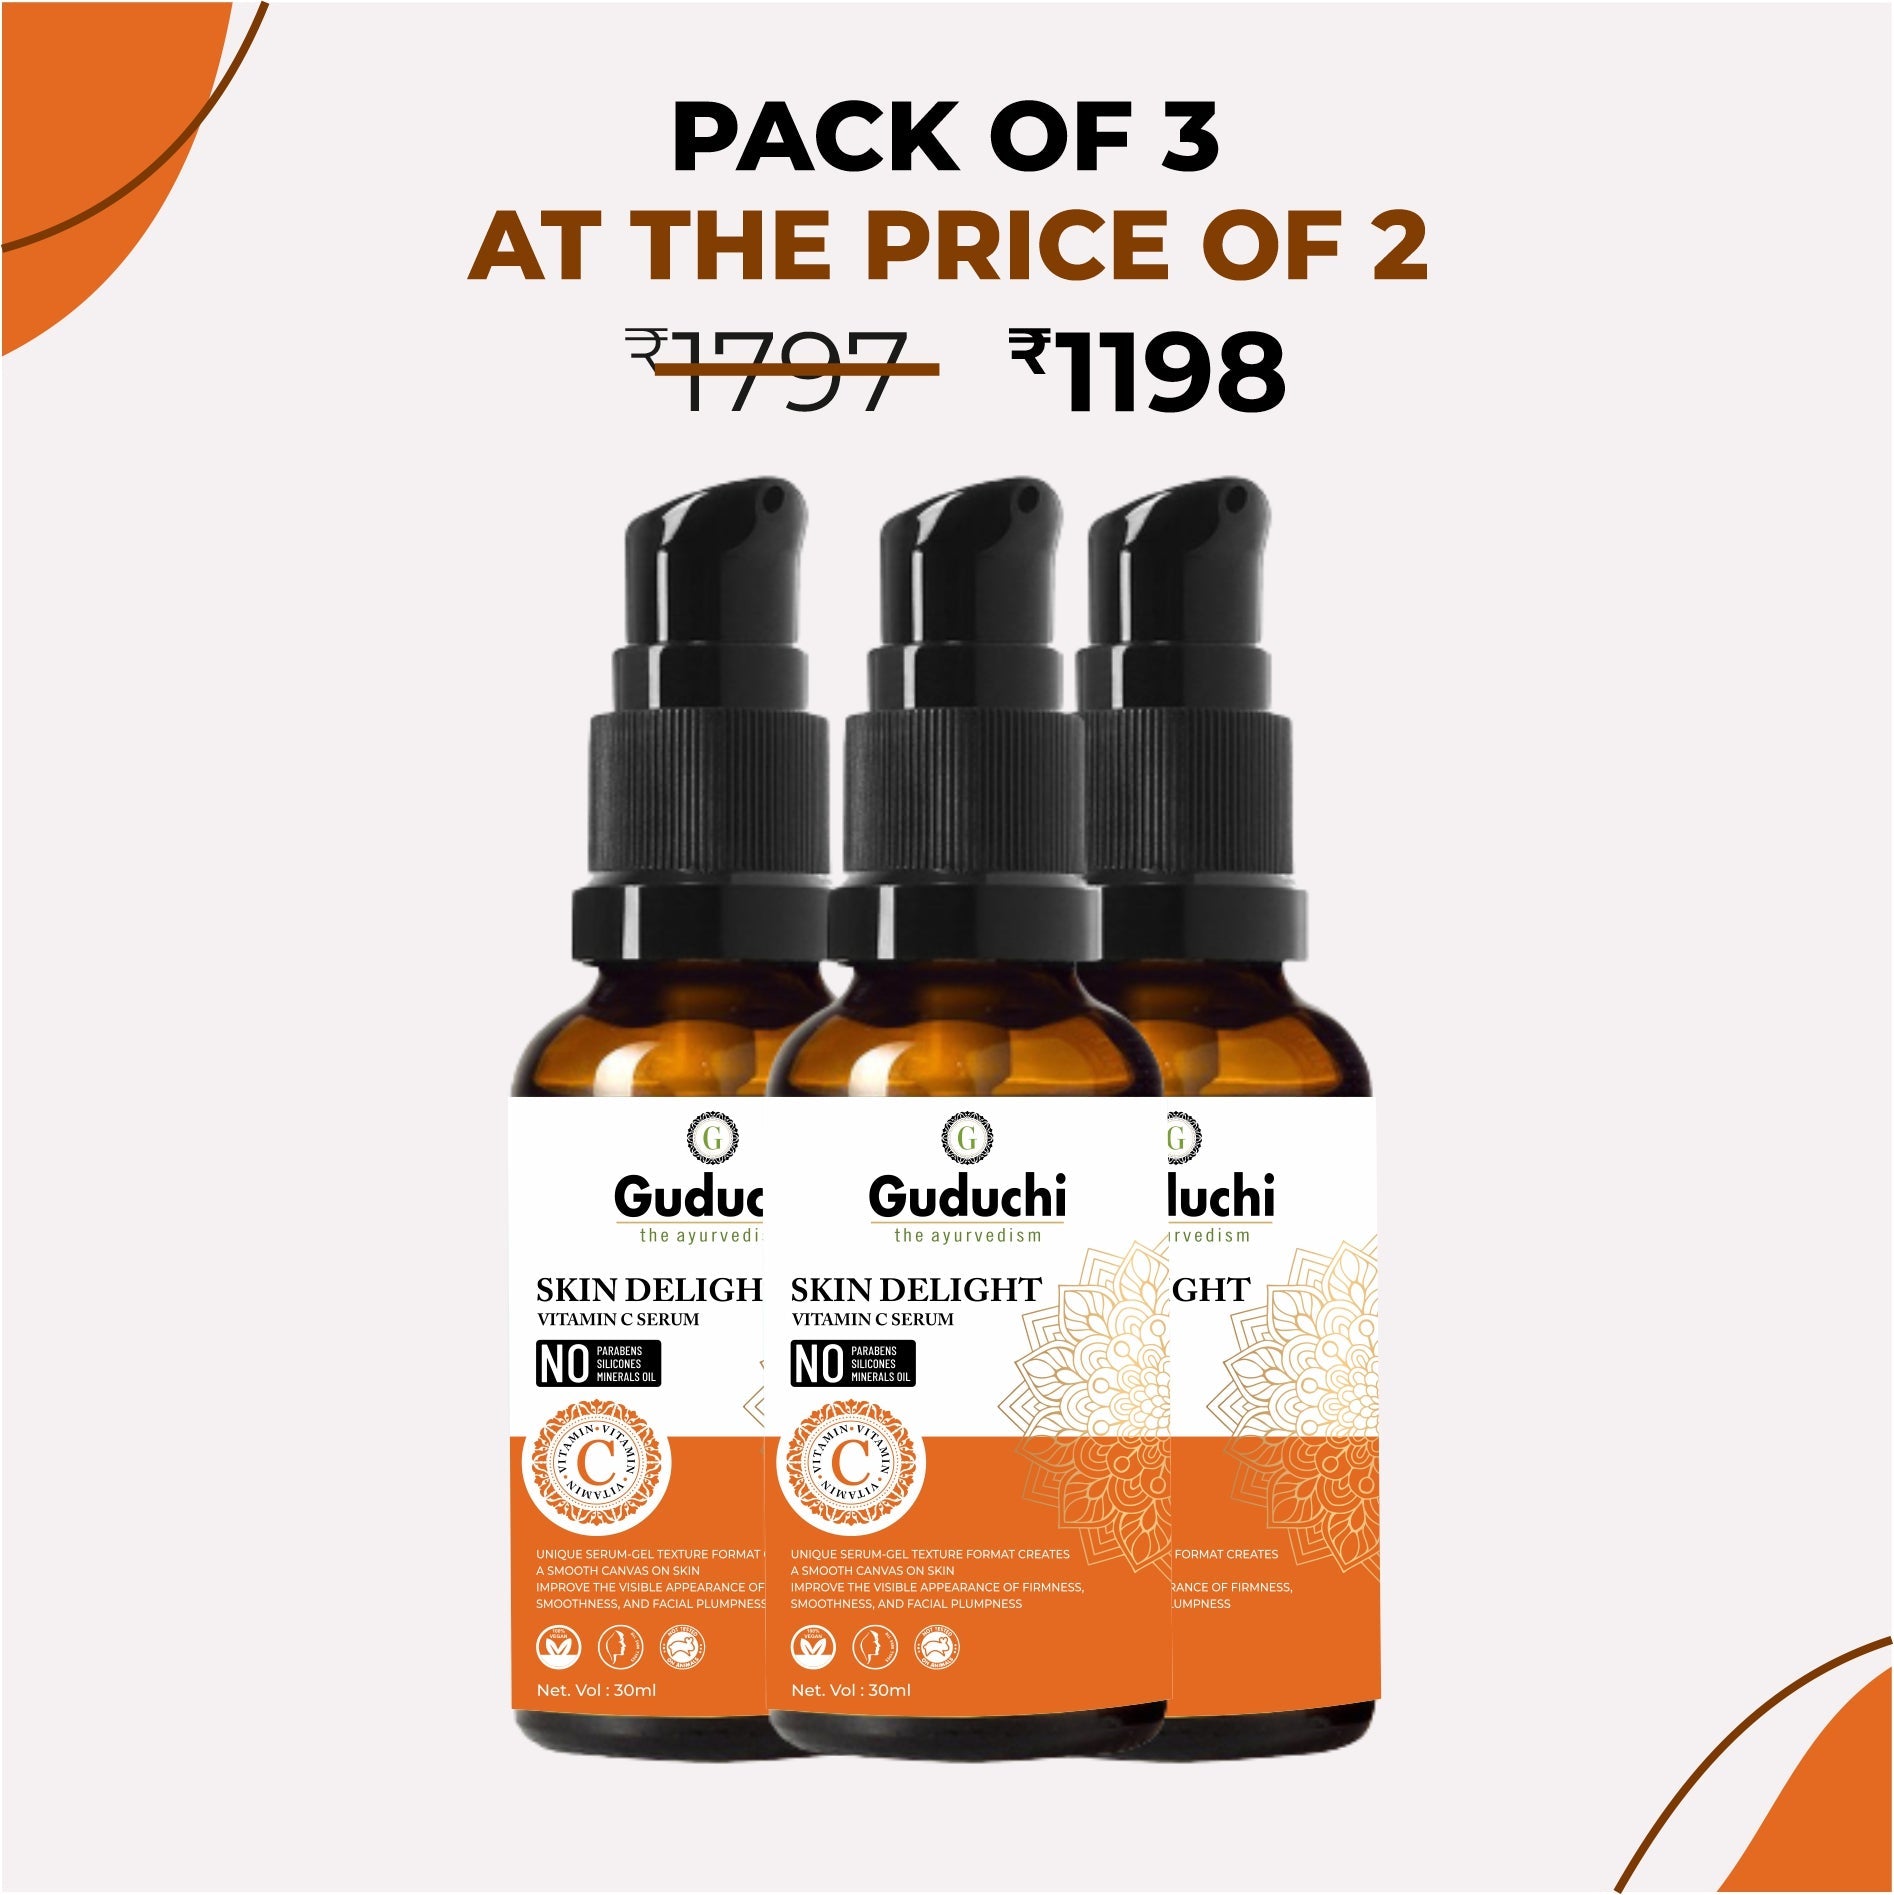 Guduchi Ayurveda Skin Delight Vitamin C [Kakadu plum extract] serum along with Jojoba oil and Aloe Vera. Improves the visible appearance of Firmness, Smoothness, and facial Plumpness. he visible appearance of Firmness, Smoothness & facial Plumpness-30ml - Guduchi Ayurveda